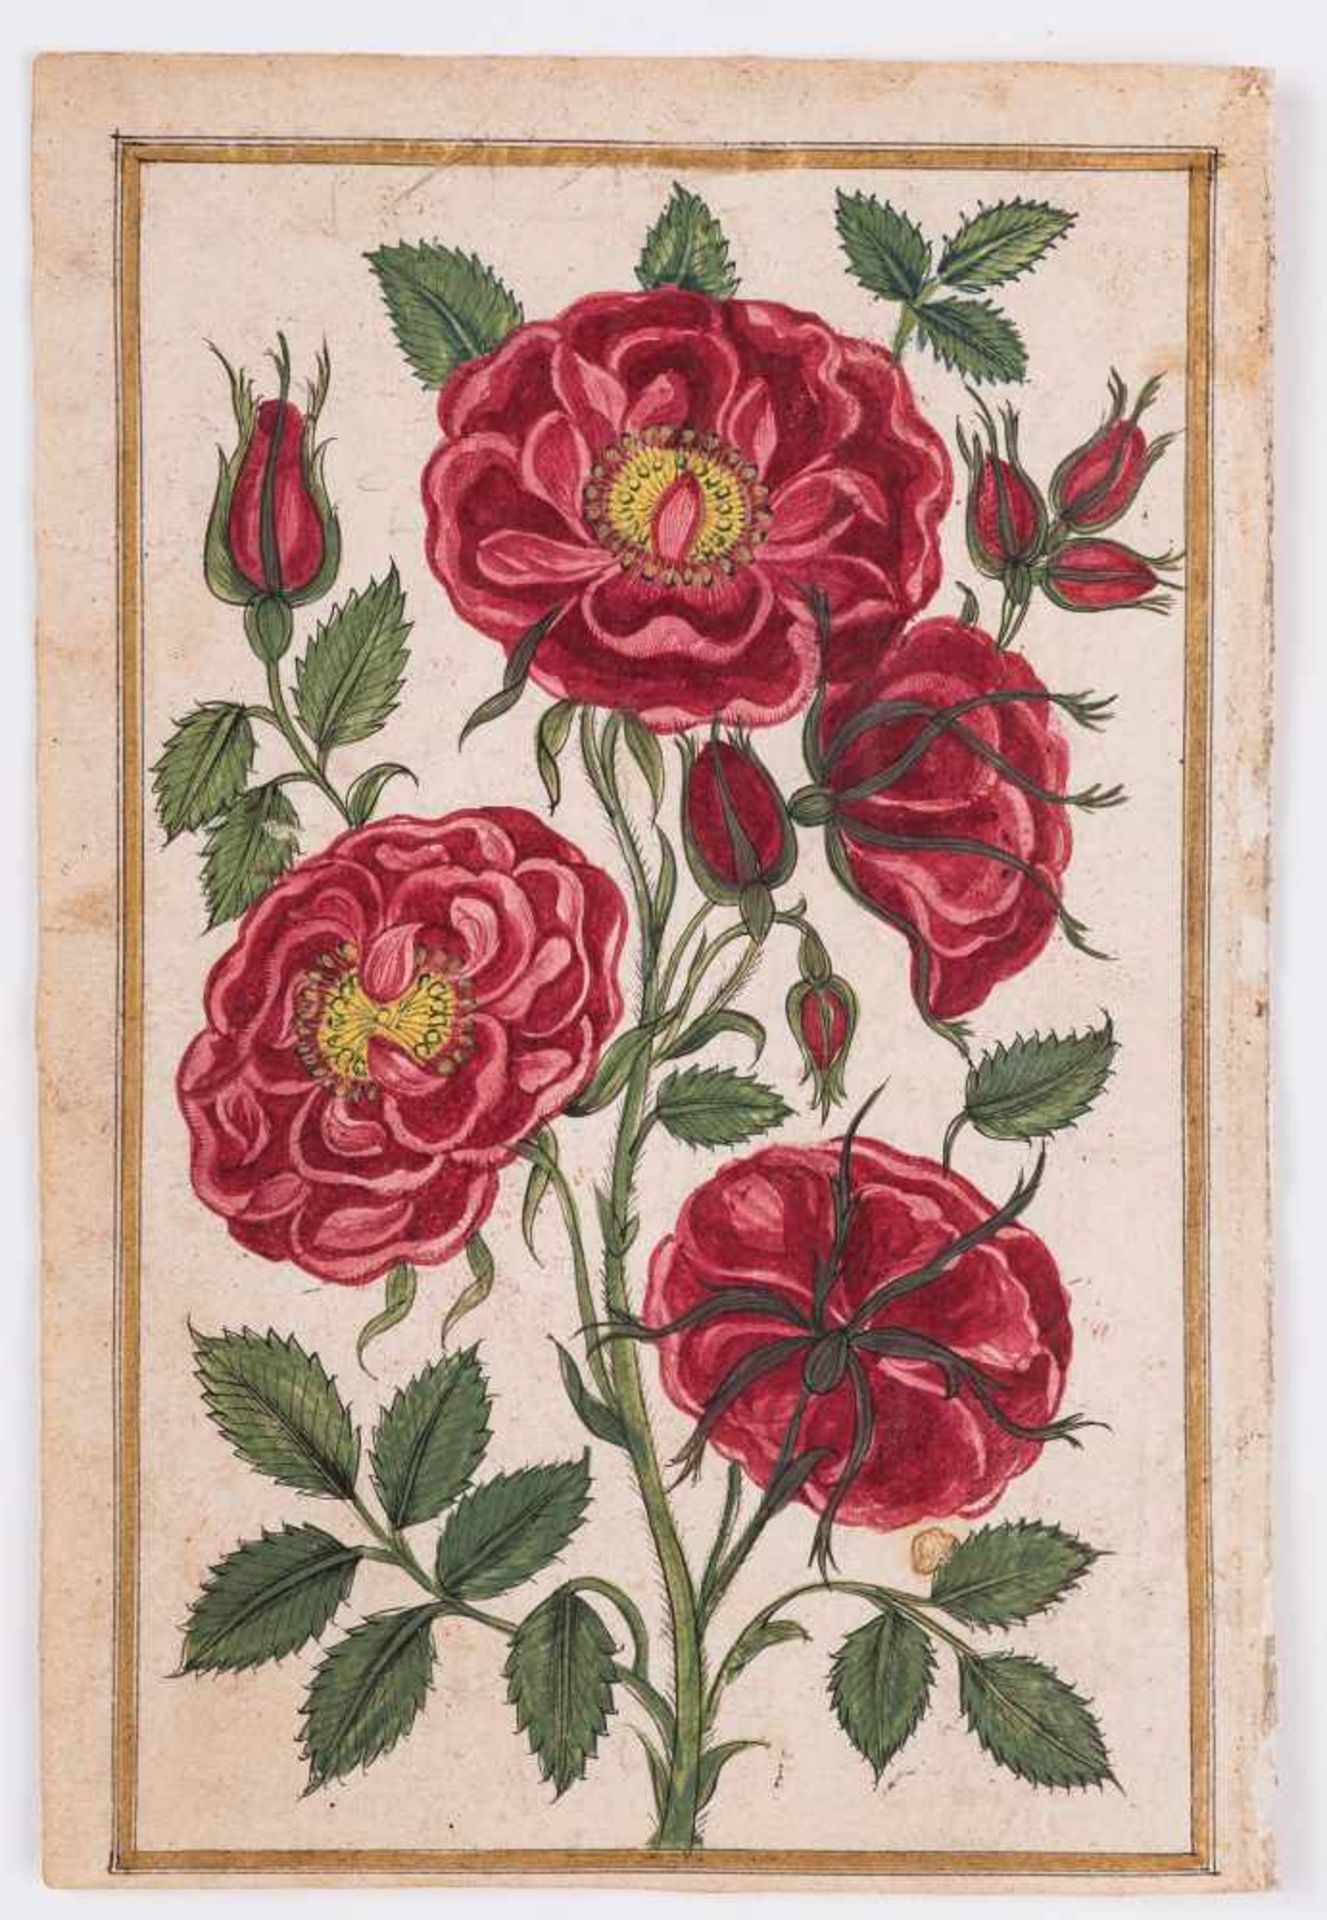 A GROUP OF ELEVEN FLOWER AND TREE MINIATURE PAINTINGS – INDIA 19th CENTURYWatercolors and gold paint - Image 8 of 12